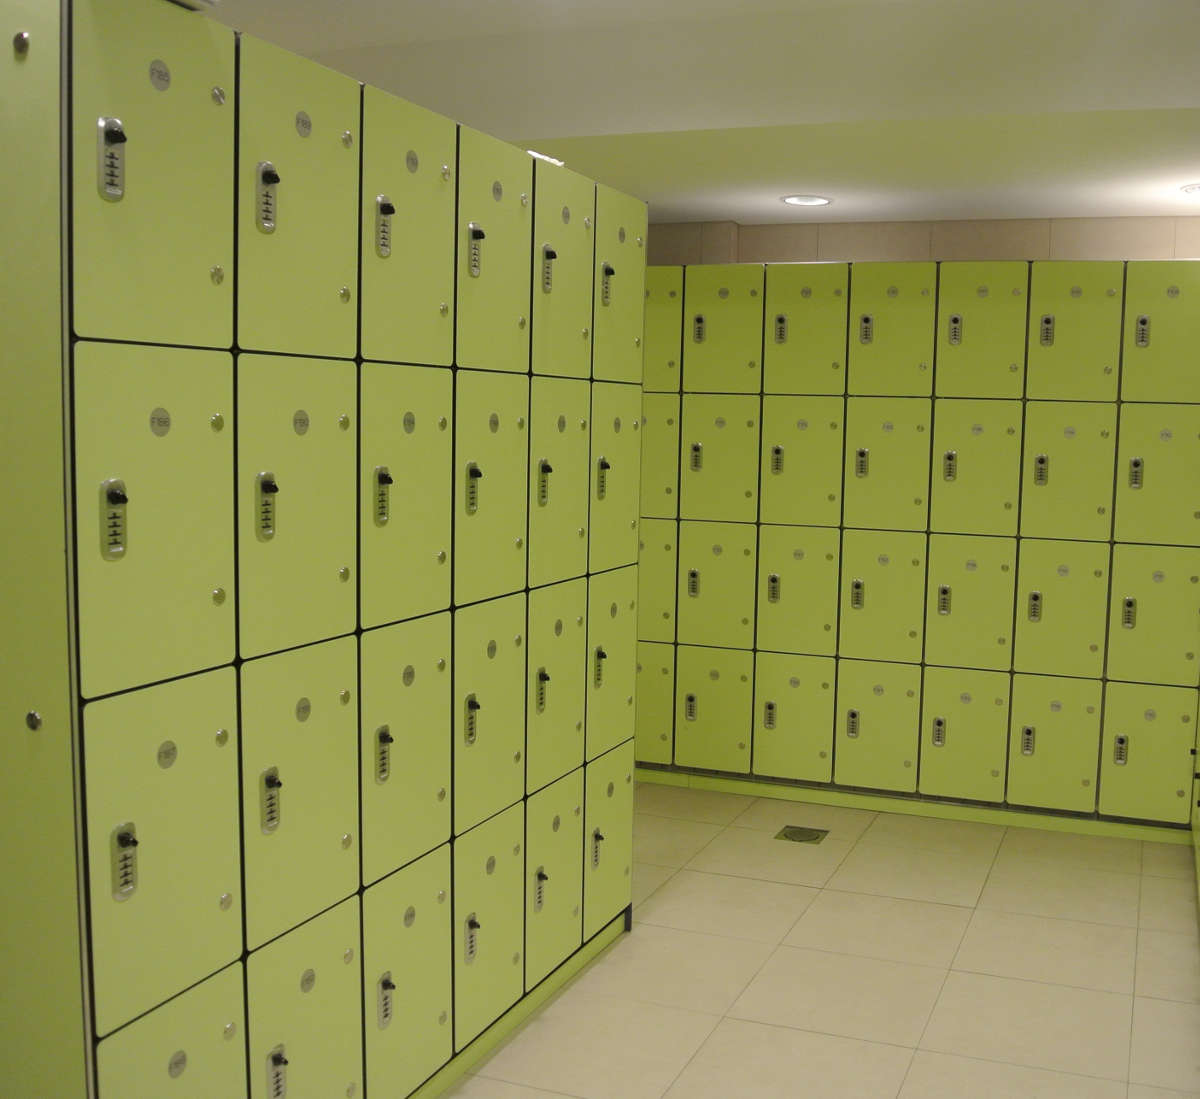 W Hotel Sentosa - BOH Staff custom & modular lockers, with programmable locks and ease of re-configuration.